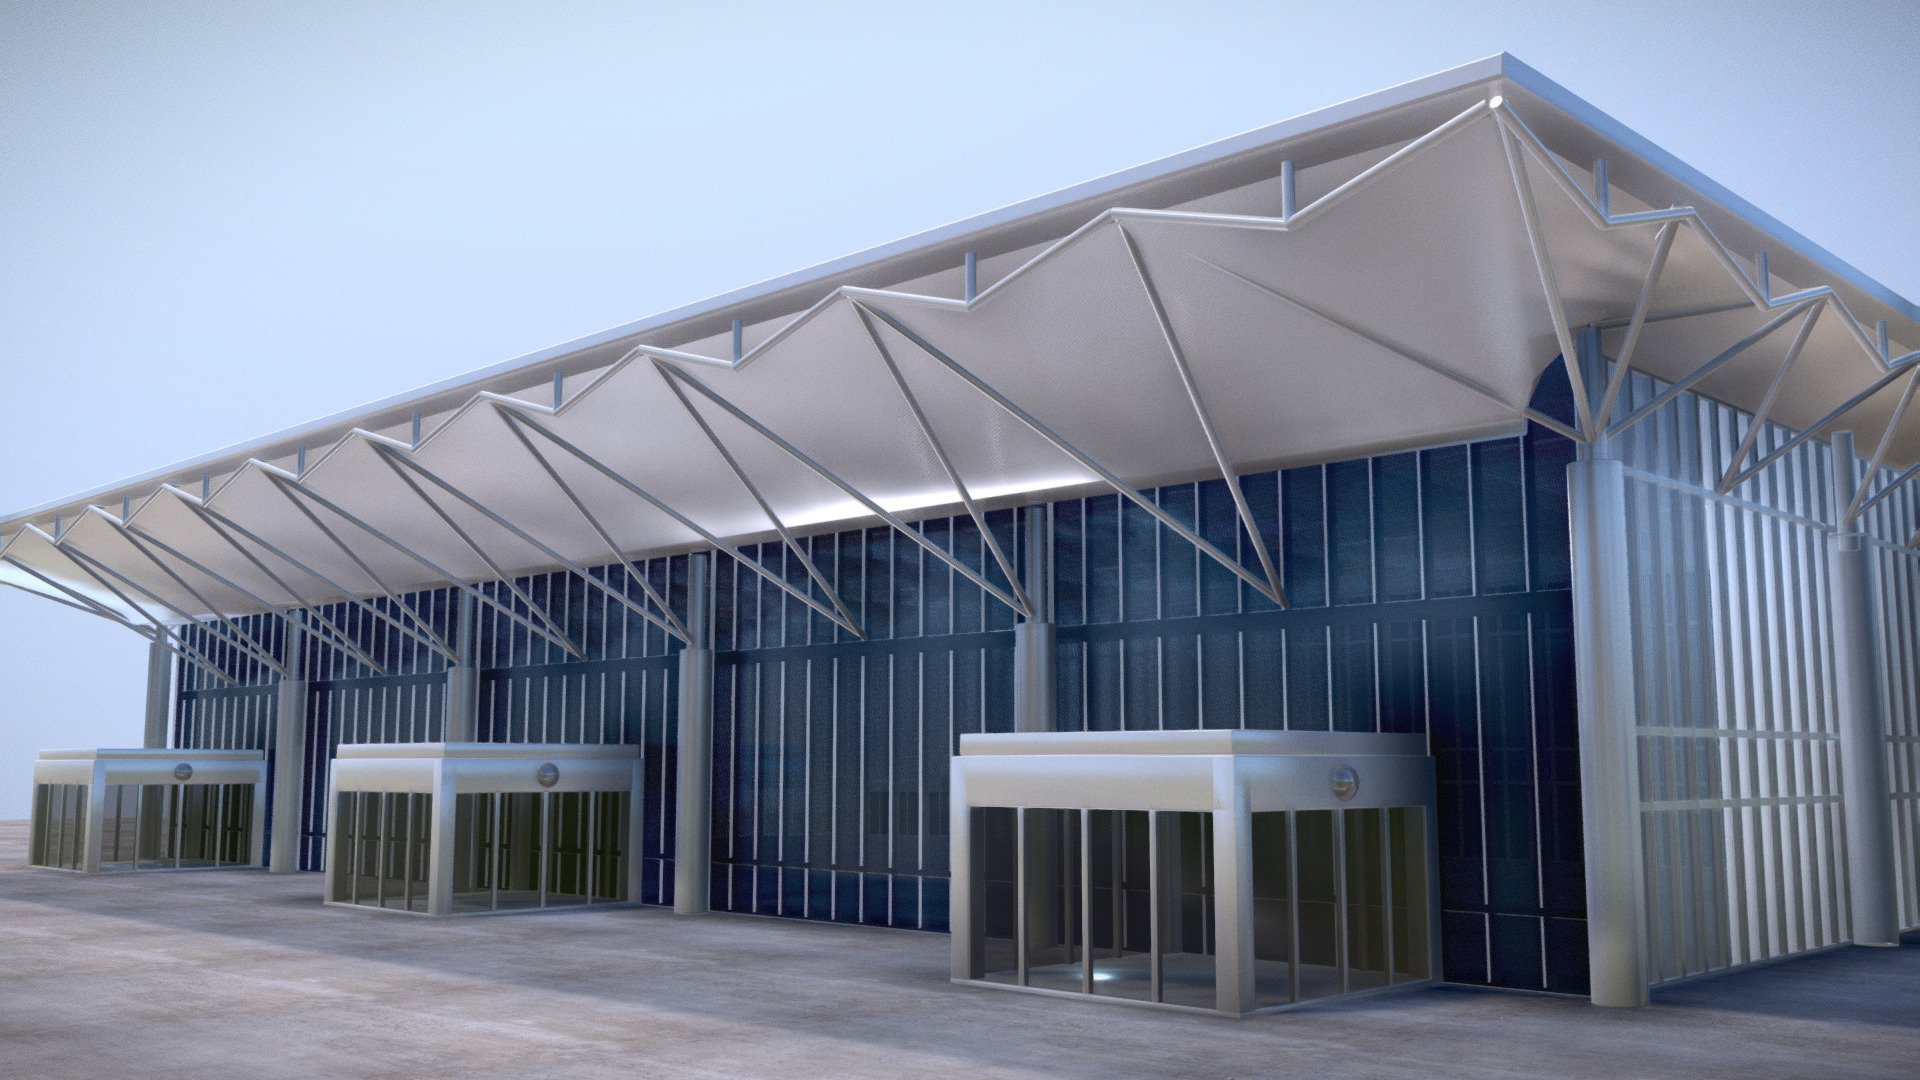 The main terminal building at Bristol Airport. This was modelled for a 3D representation of Bristol Airport. External view only.

High-poly model with medium to high-resolution texture maps published by 3ds Max.

Part of my Airport collection: https://skfb.ly/6JyCC - Terminal Building Bristol Airport - 3D model by Kanedog (@Kane33) 3d model